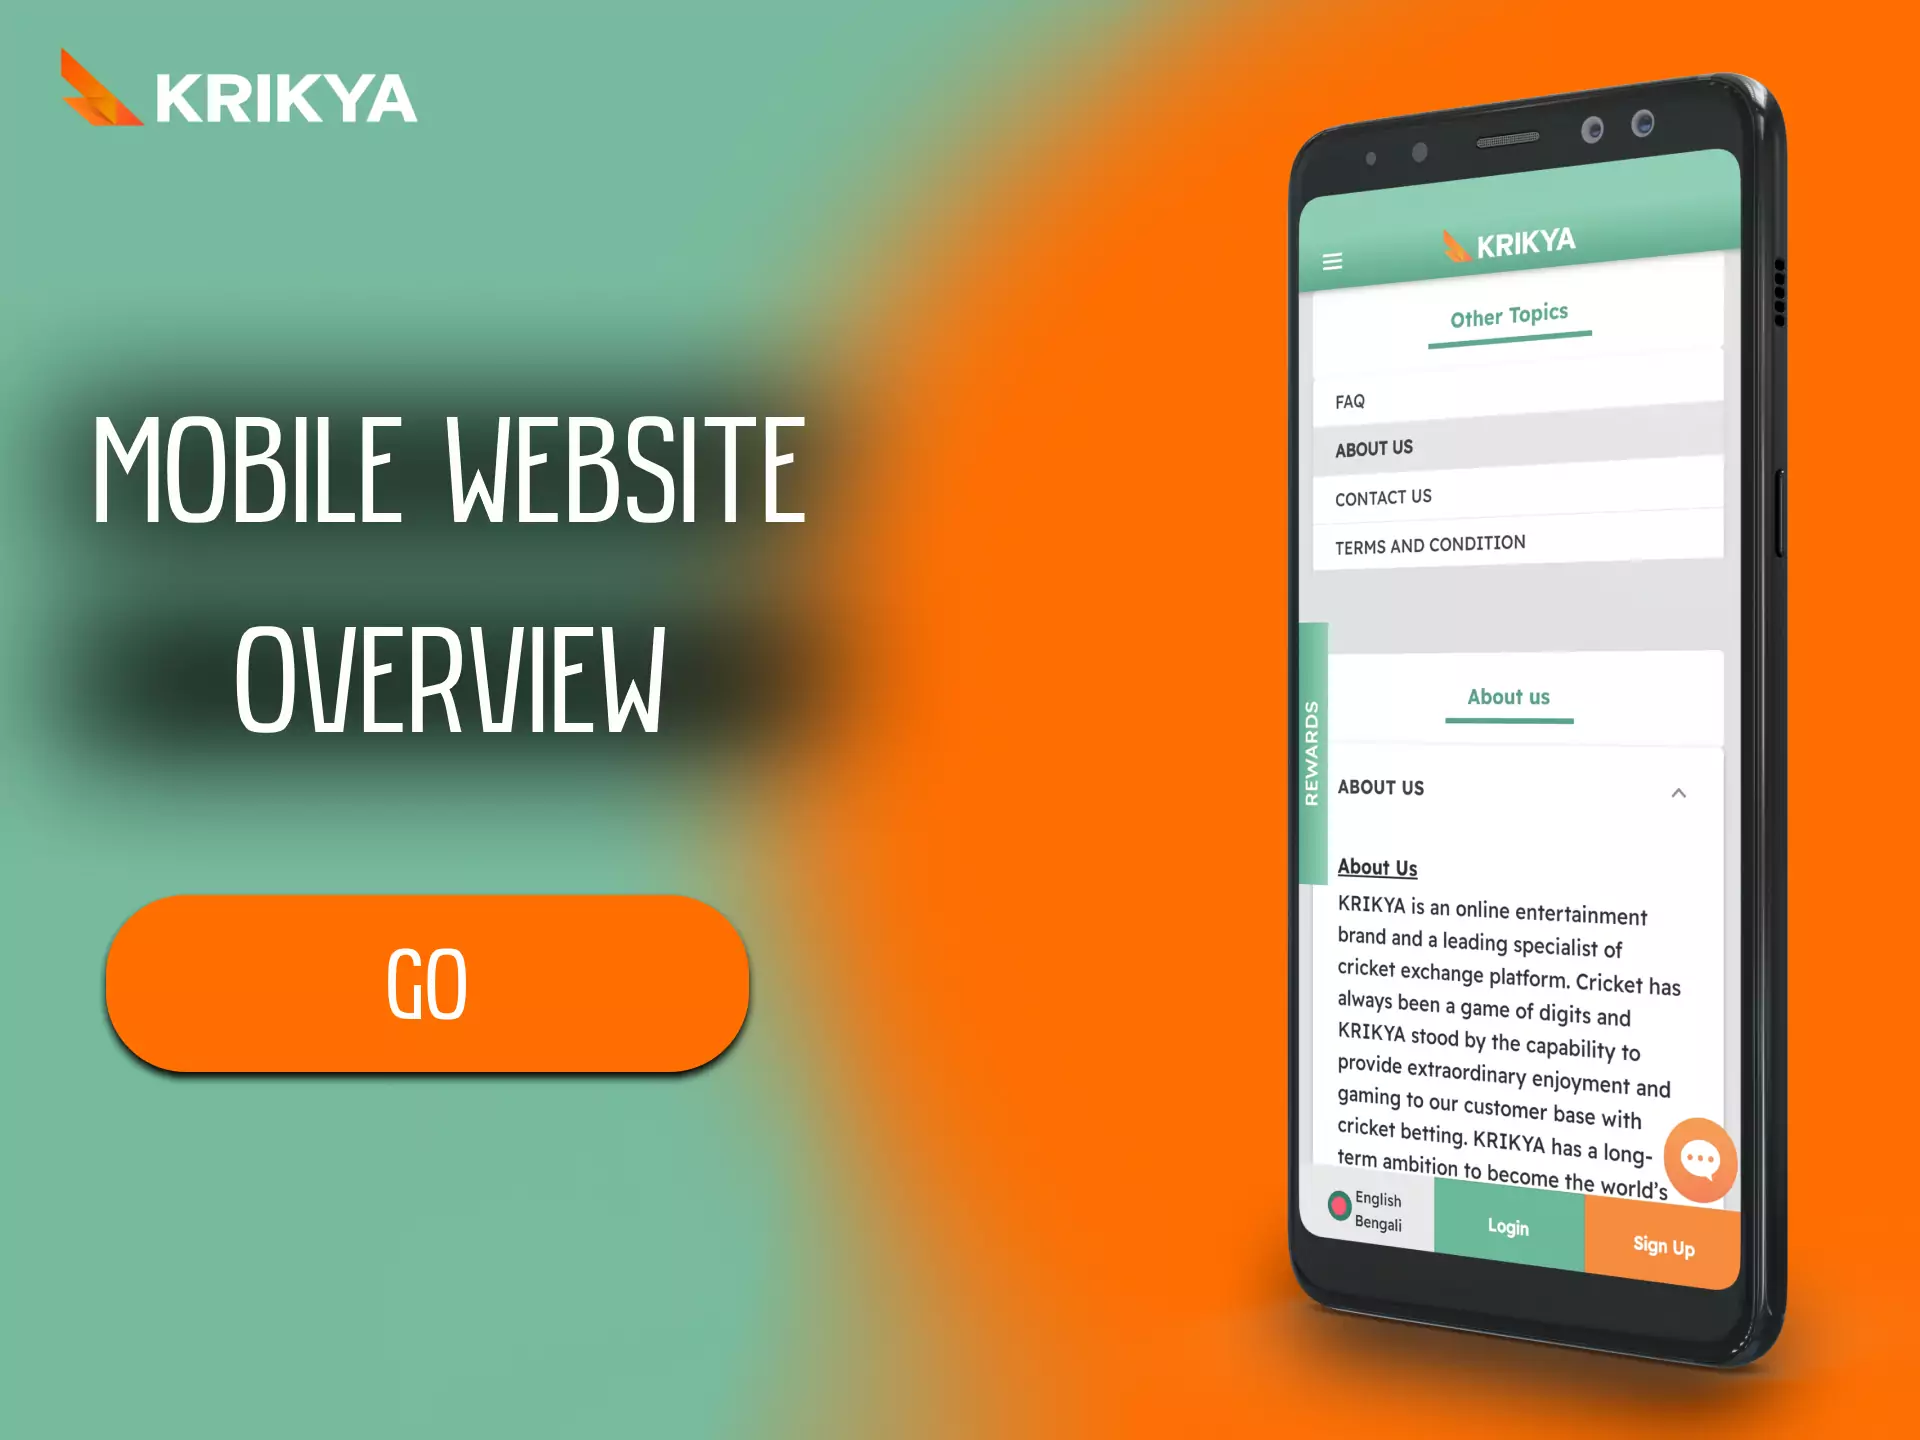 Krikya has a convenient mobile website so that players can use bonuses and play anywhere.